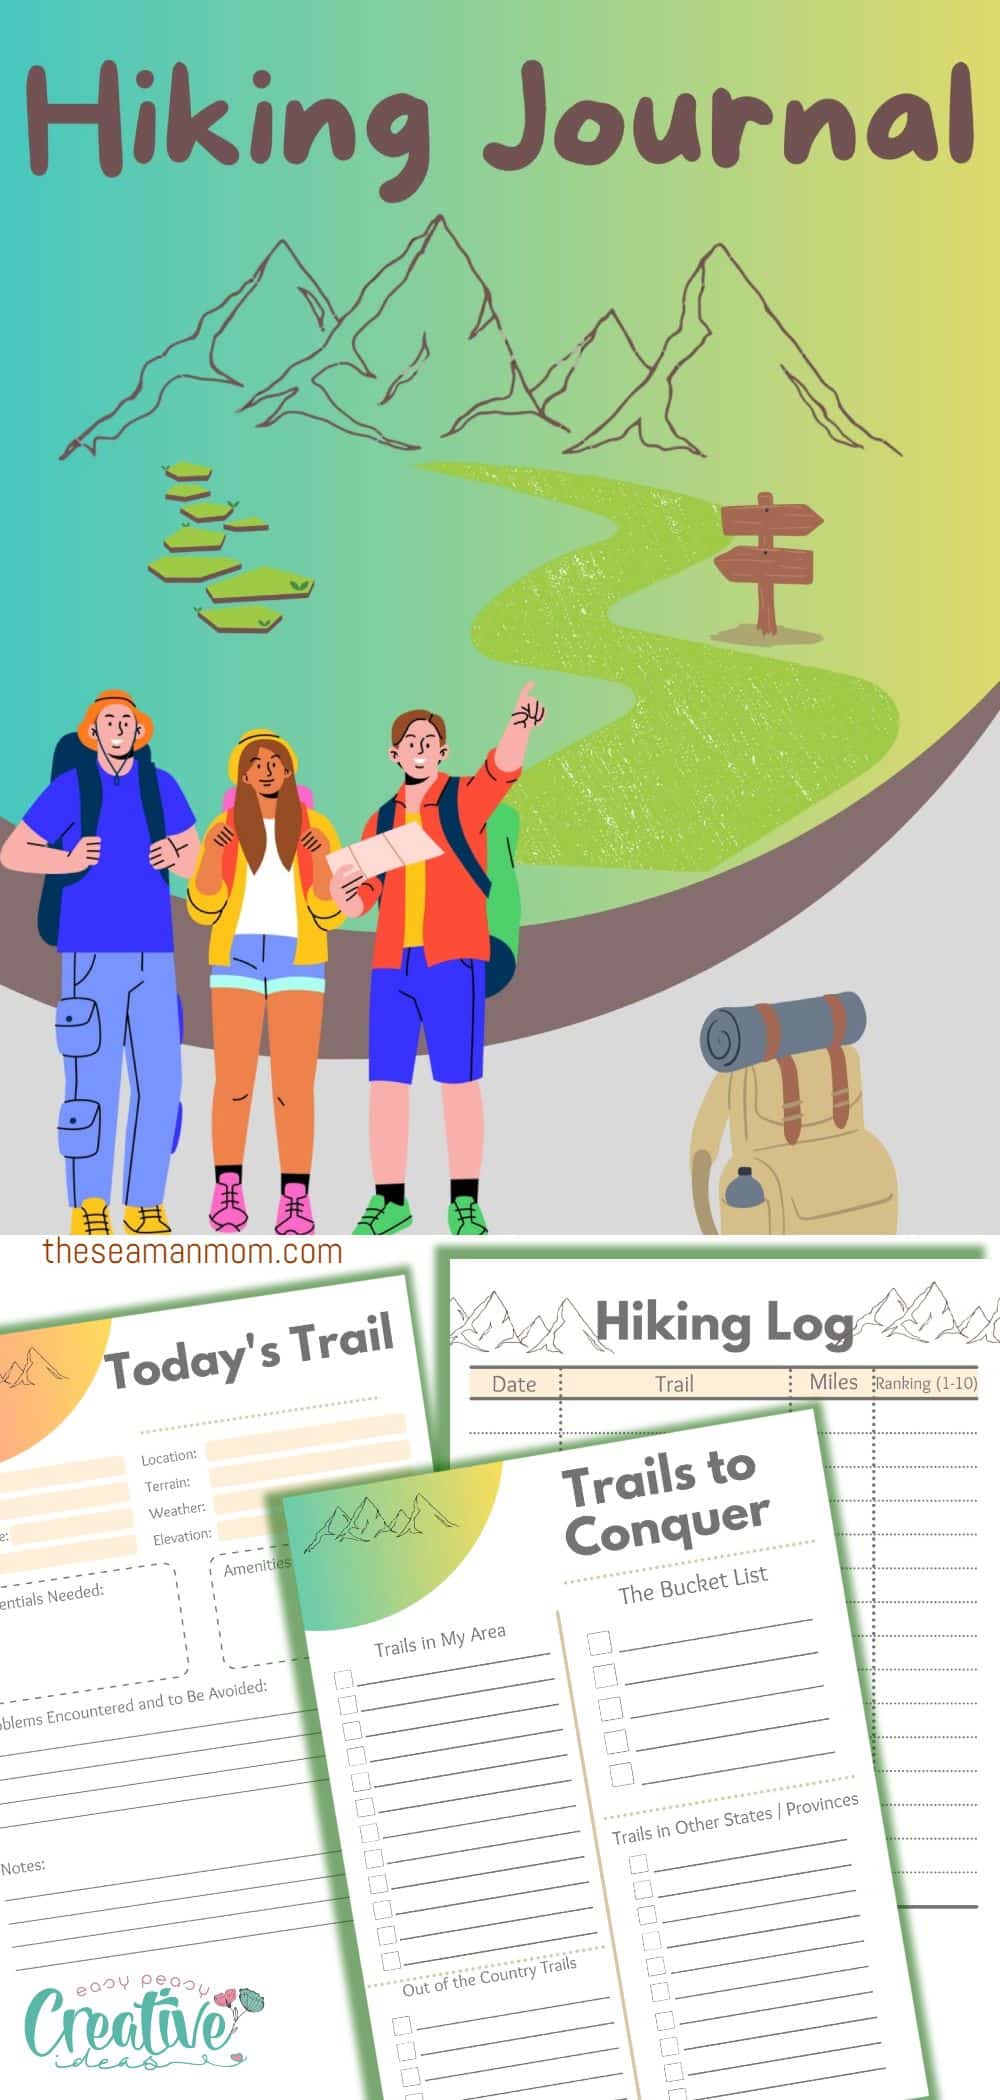 Are you ready to experience the outdoors and have a hike of a lifetime? Make sure you’re prepared by getting organized with a hiking journal. Whether it's recording the trails you take, tracking your progress, or simply capturing special memories from your journey, this hiking journal template can help keep all of your information organized so that your next hike is even better than the last. via @petroneagu